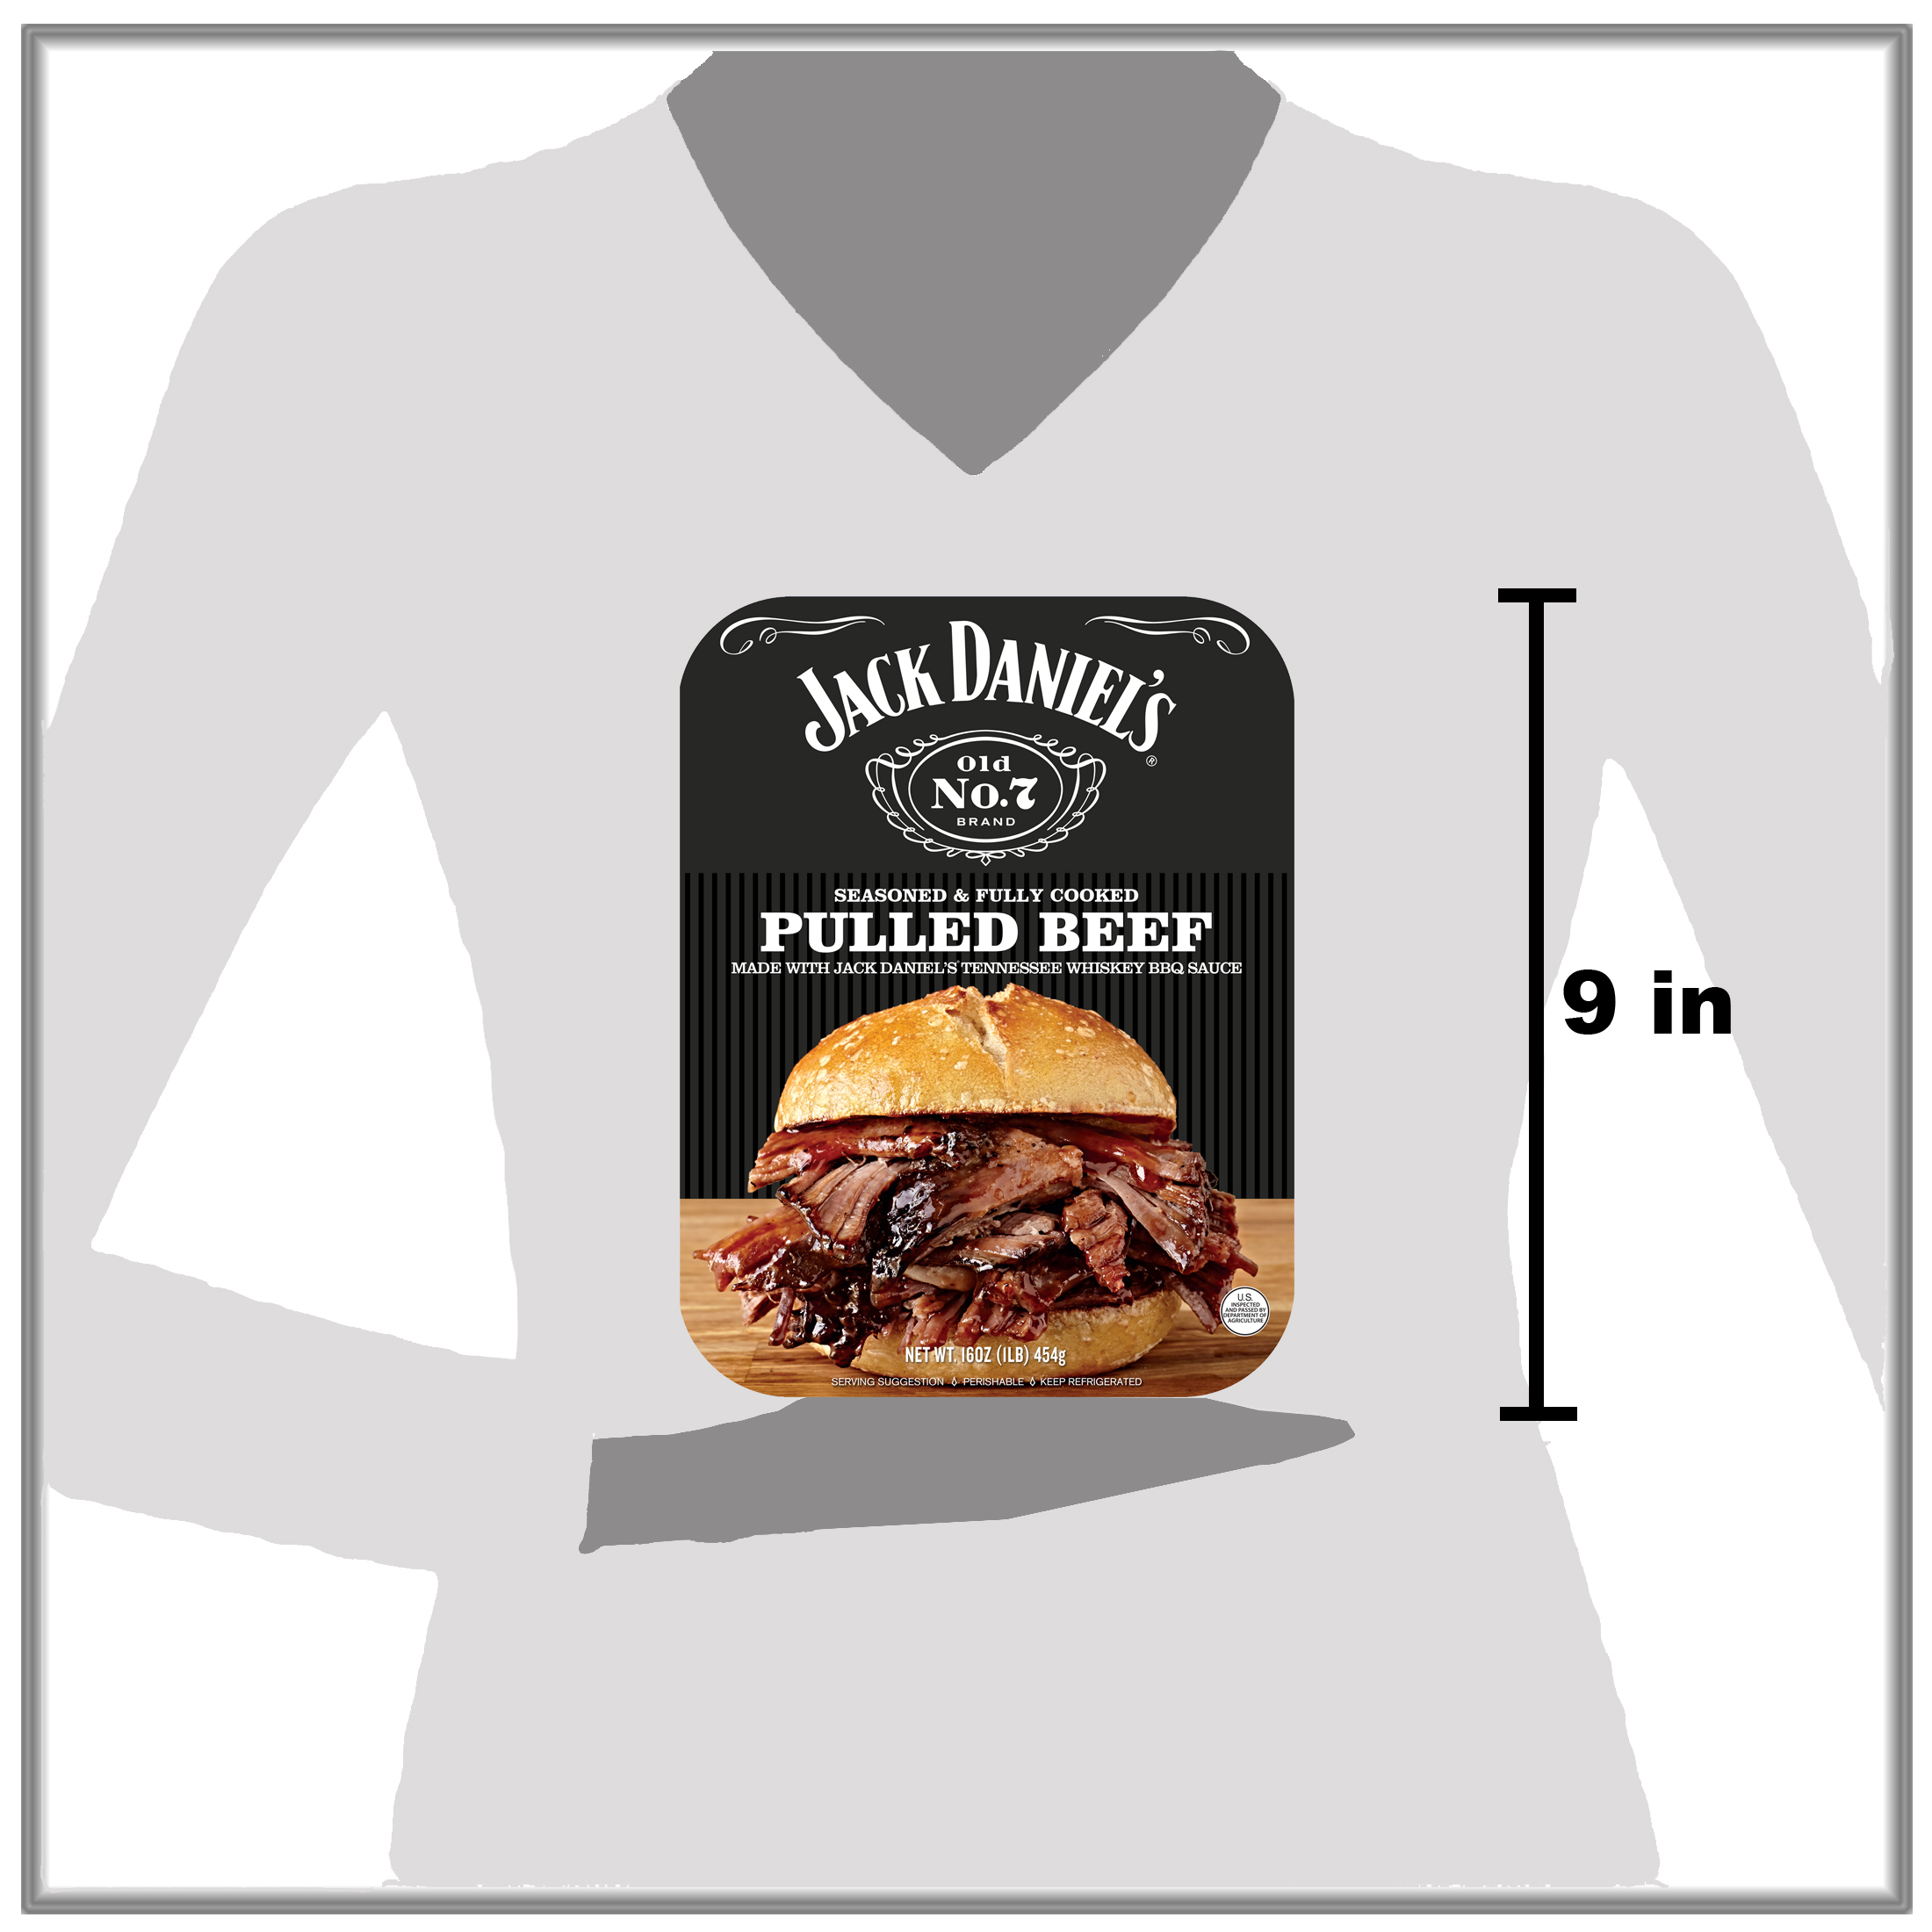 Jack Daniel's Seasoned Pulled Beef, Fully Cooked, Ready to Heat,16 oz Tray (Refrigerated) - image 9 of 13